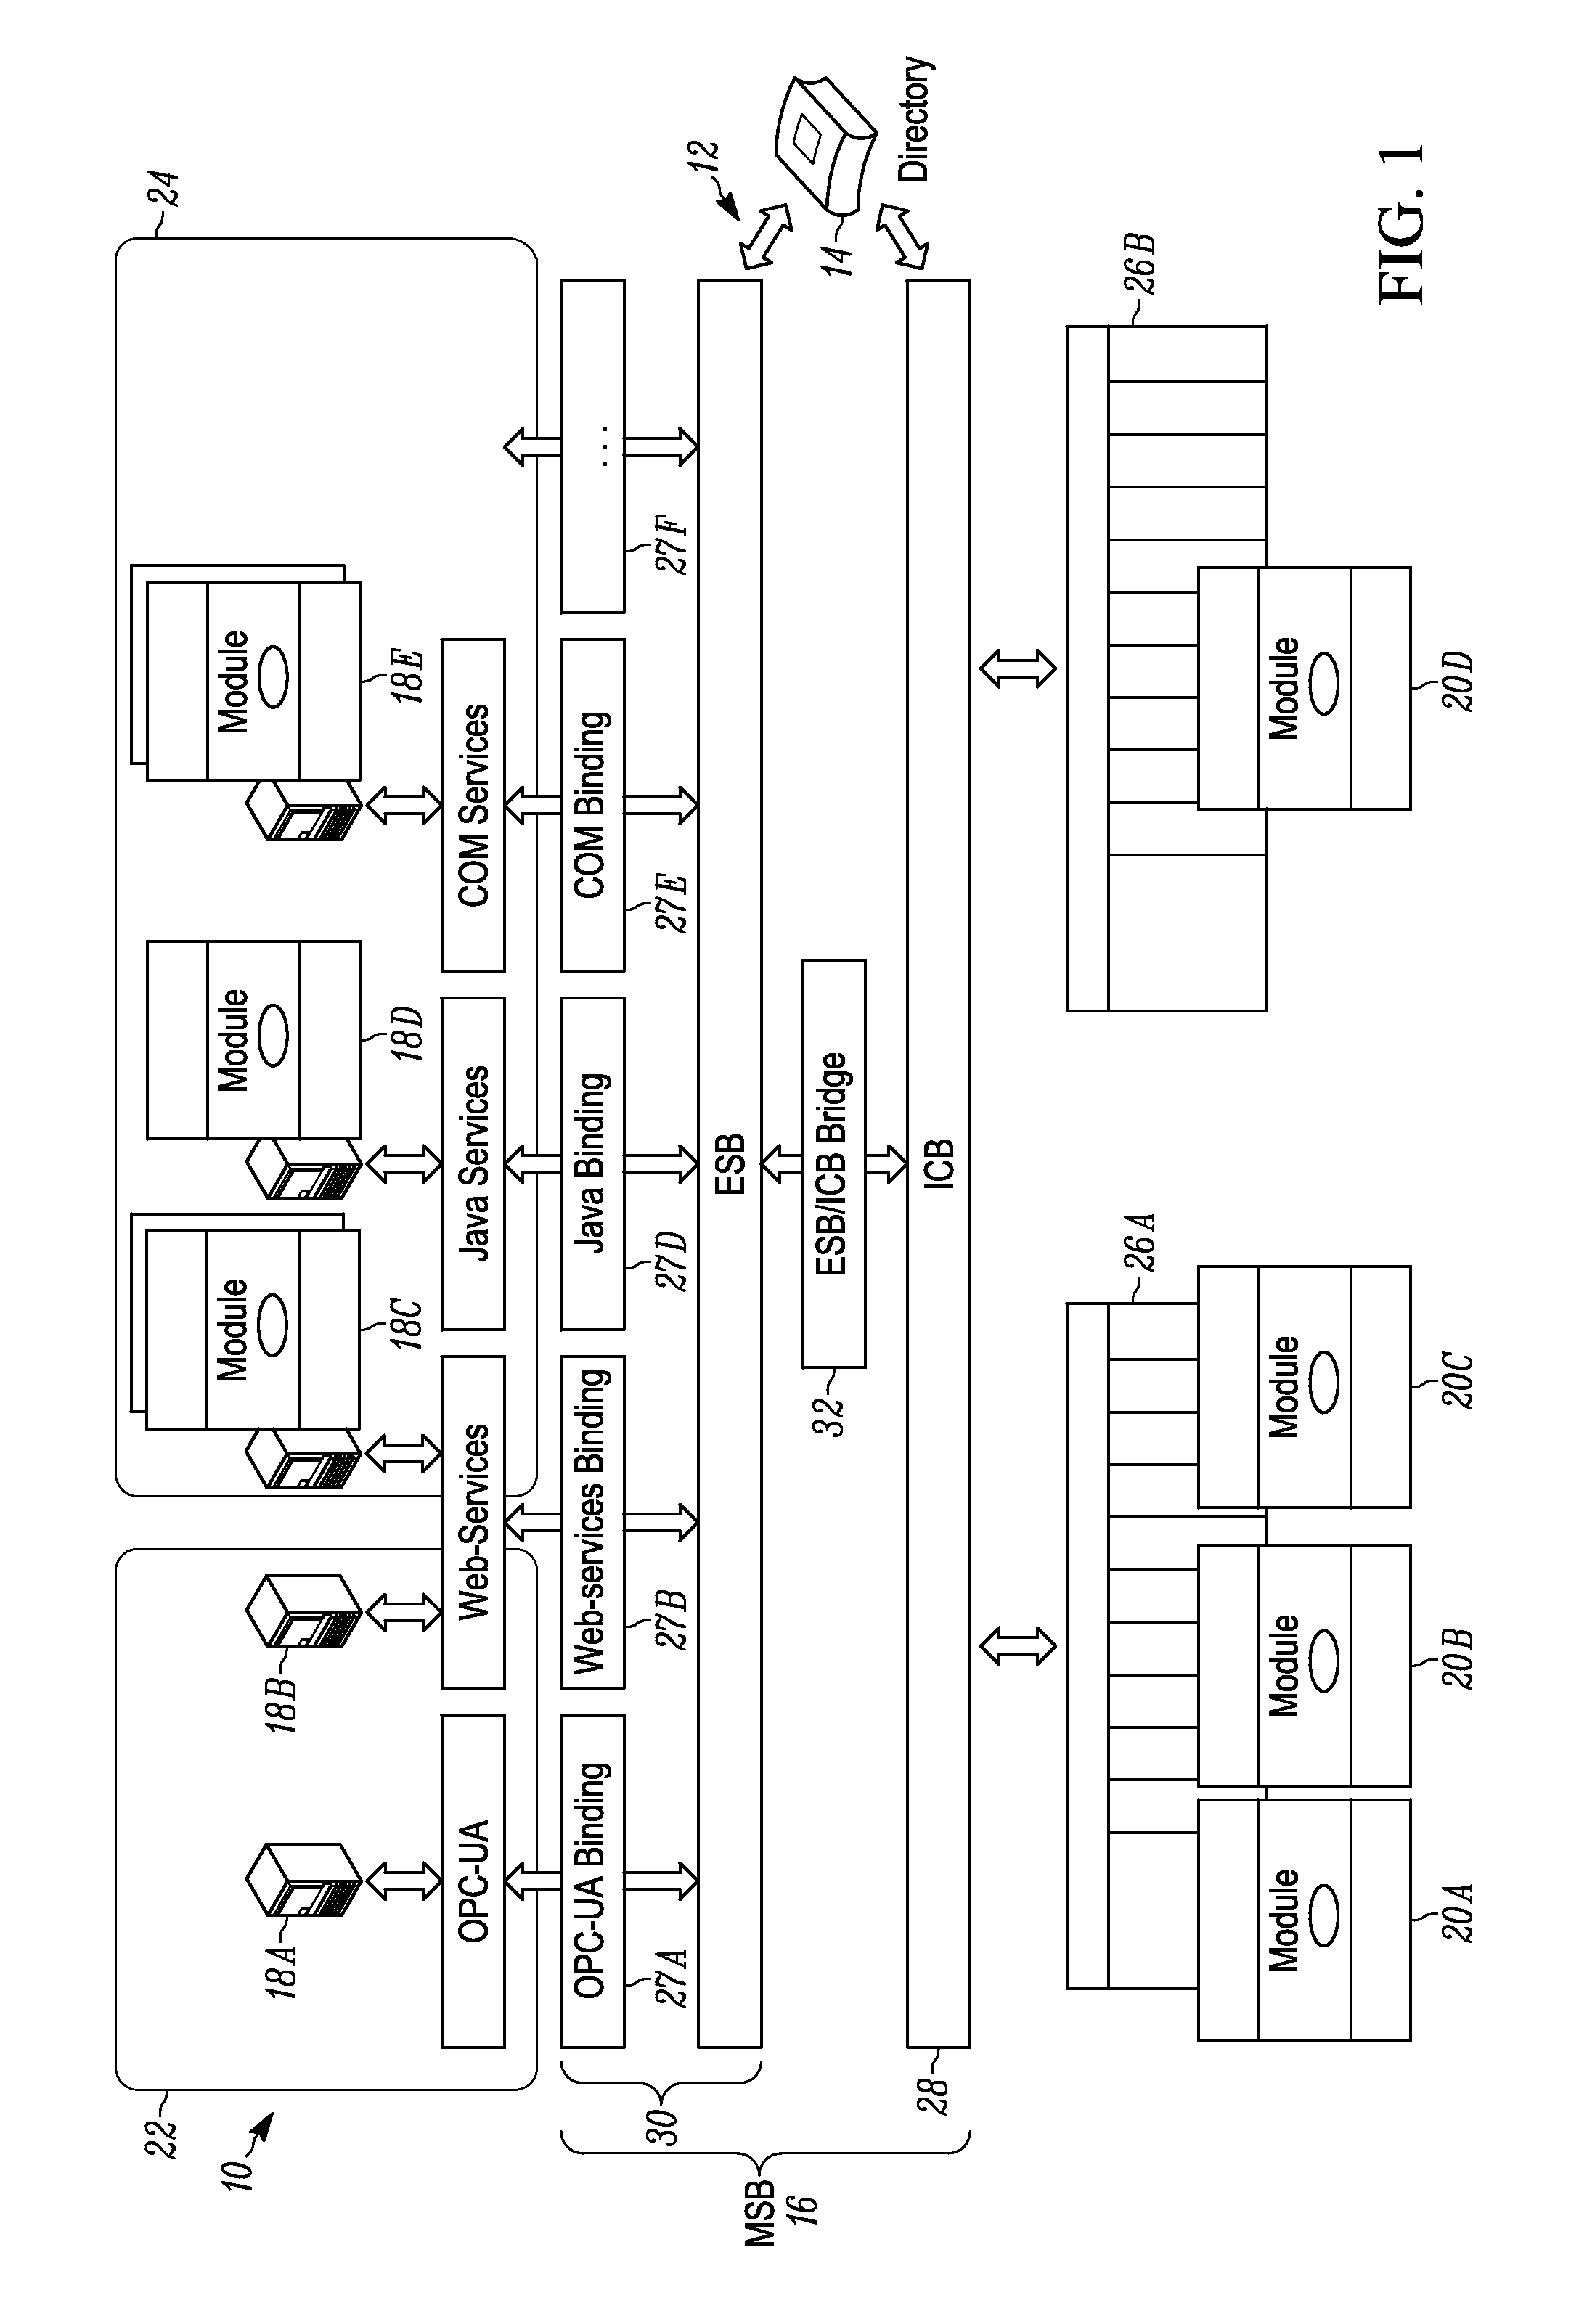 Systems and methods for conducting communications among components of multidomain industrial automation system